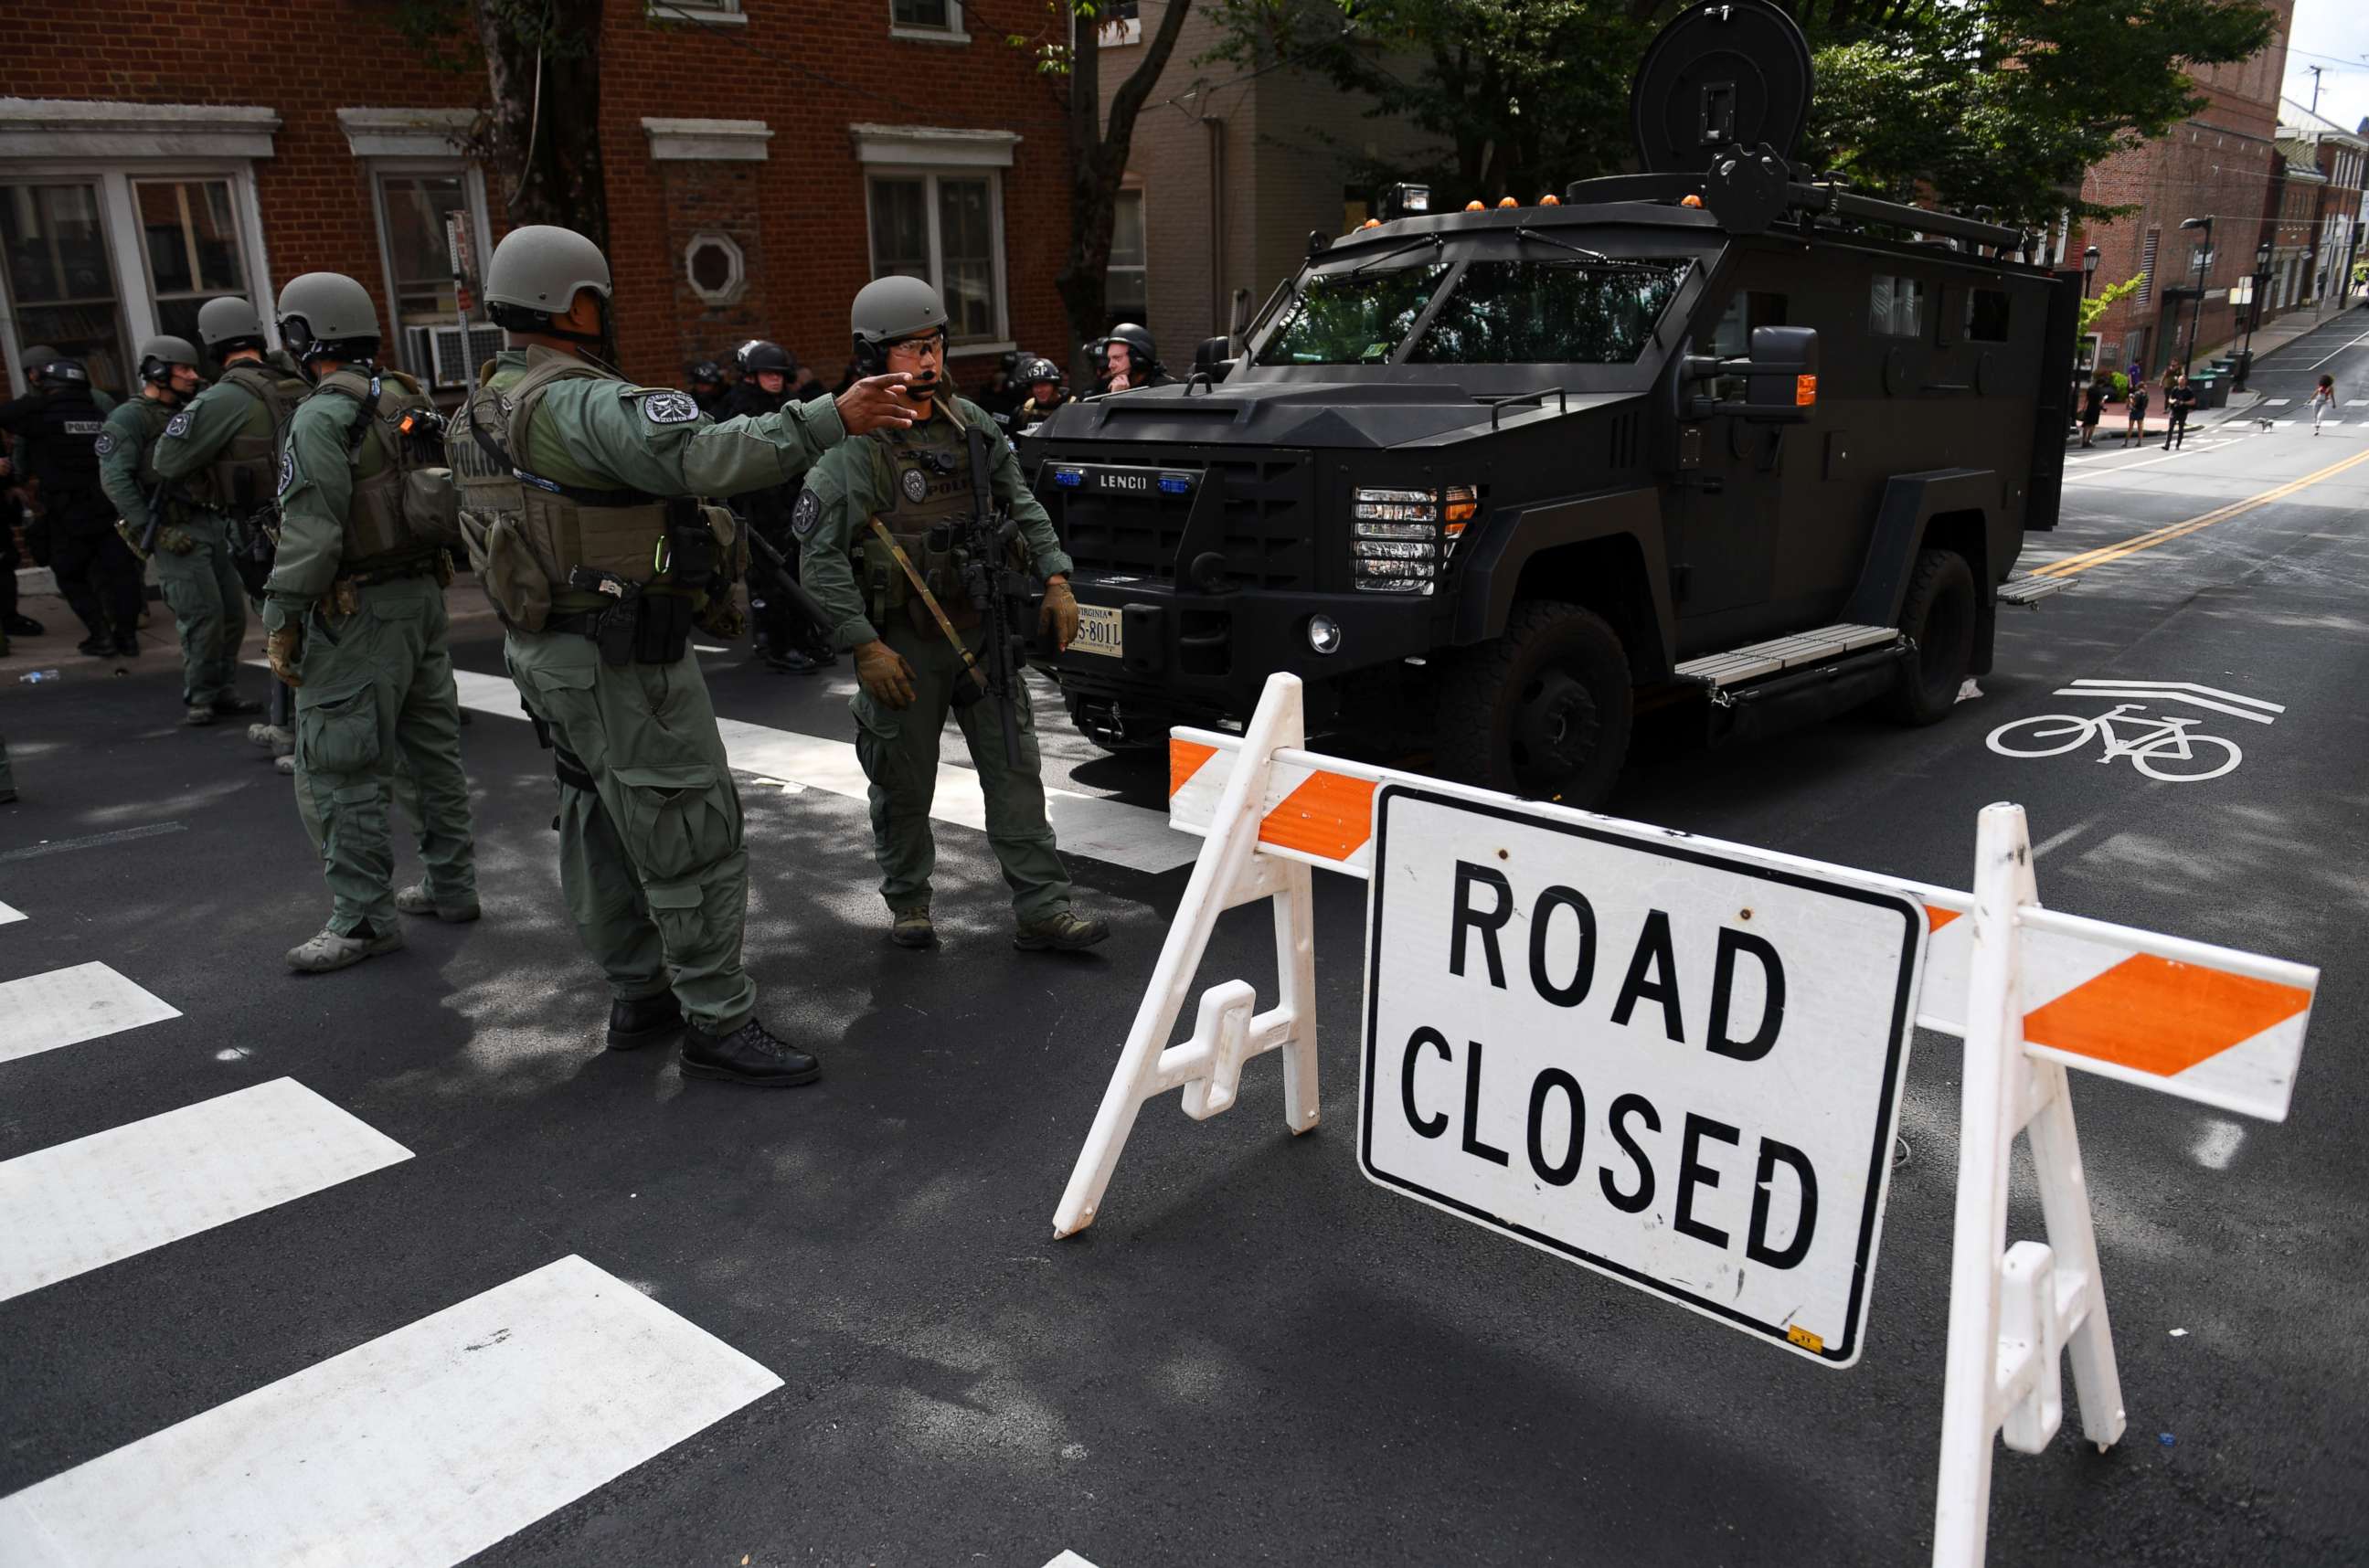 PHOTO: Police stand guard near the rally site in Charlottesville, Va., Aug. 12, 2017. At least one person was killed in a multiple car crash following a violent white nationalist rally said Charlottesville Mayor Michael Signer. 